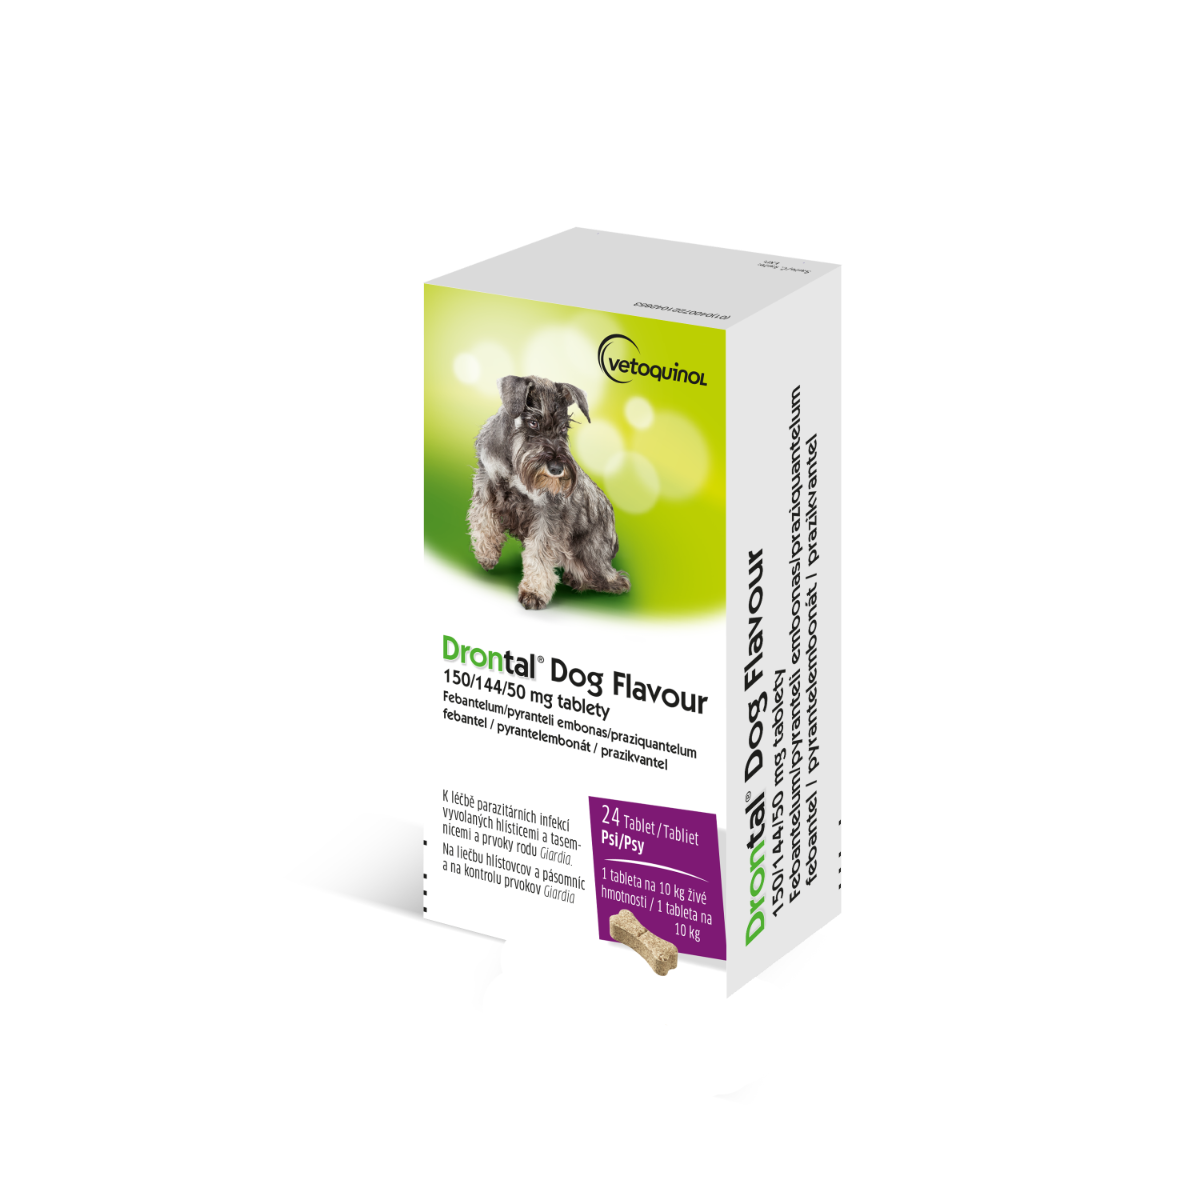 Drontal Dog Flavour 15014450 mg tablety